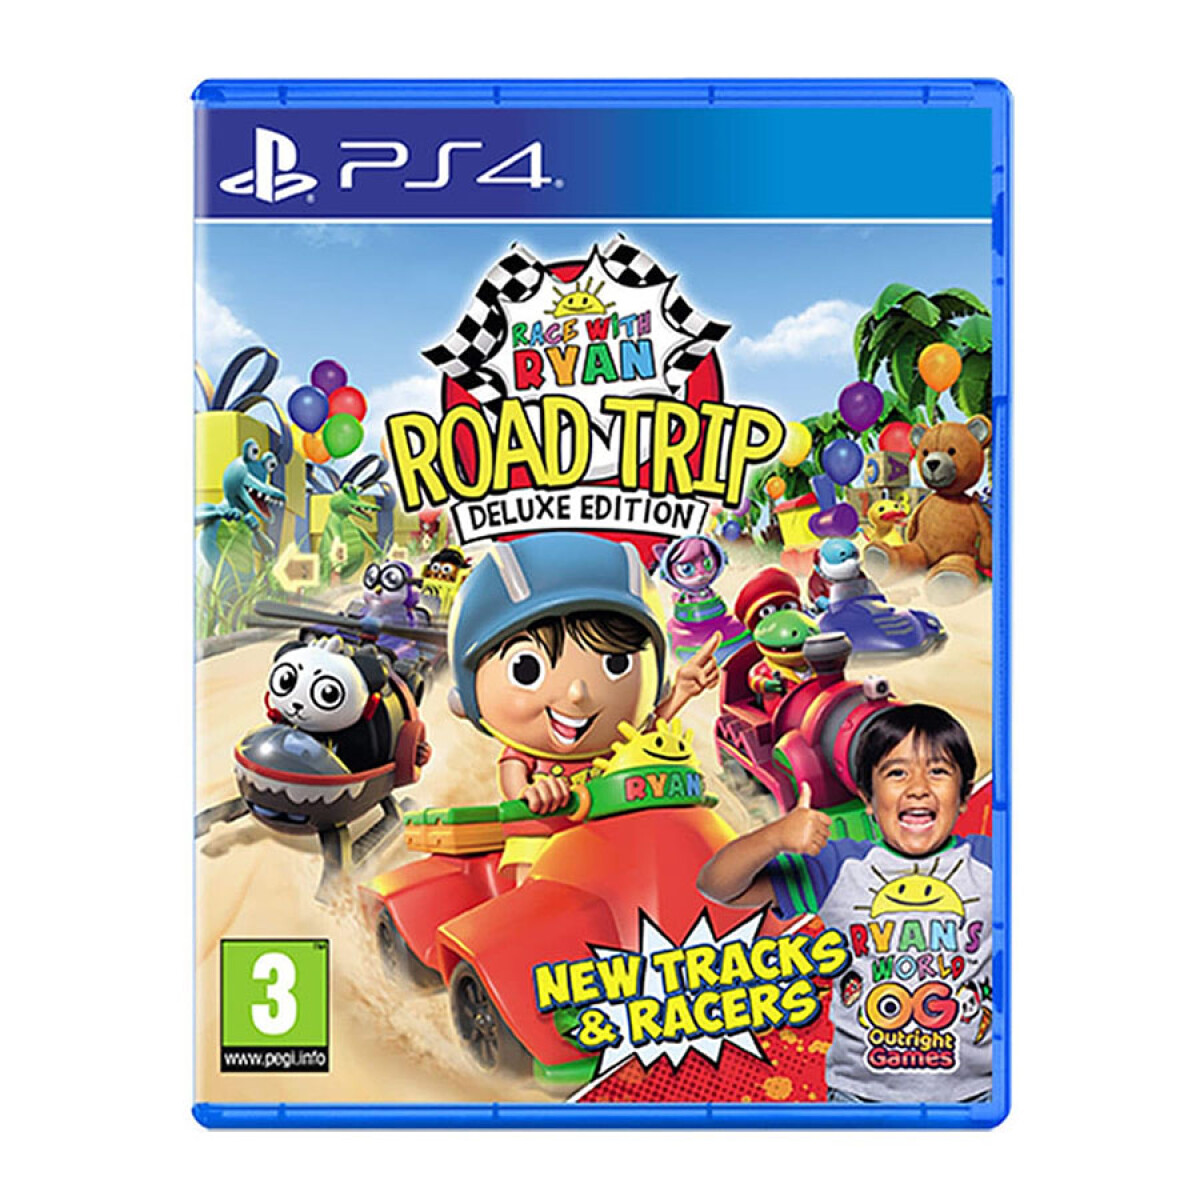 Race with Ryan: Road Trip Deluxe Edition - PS4 